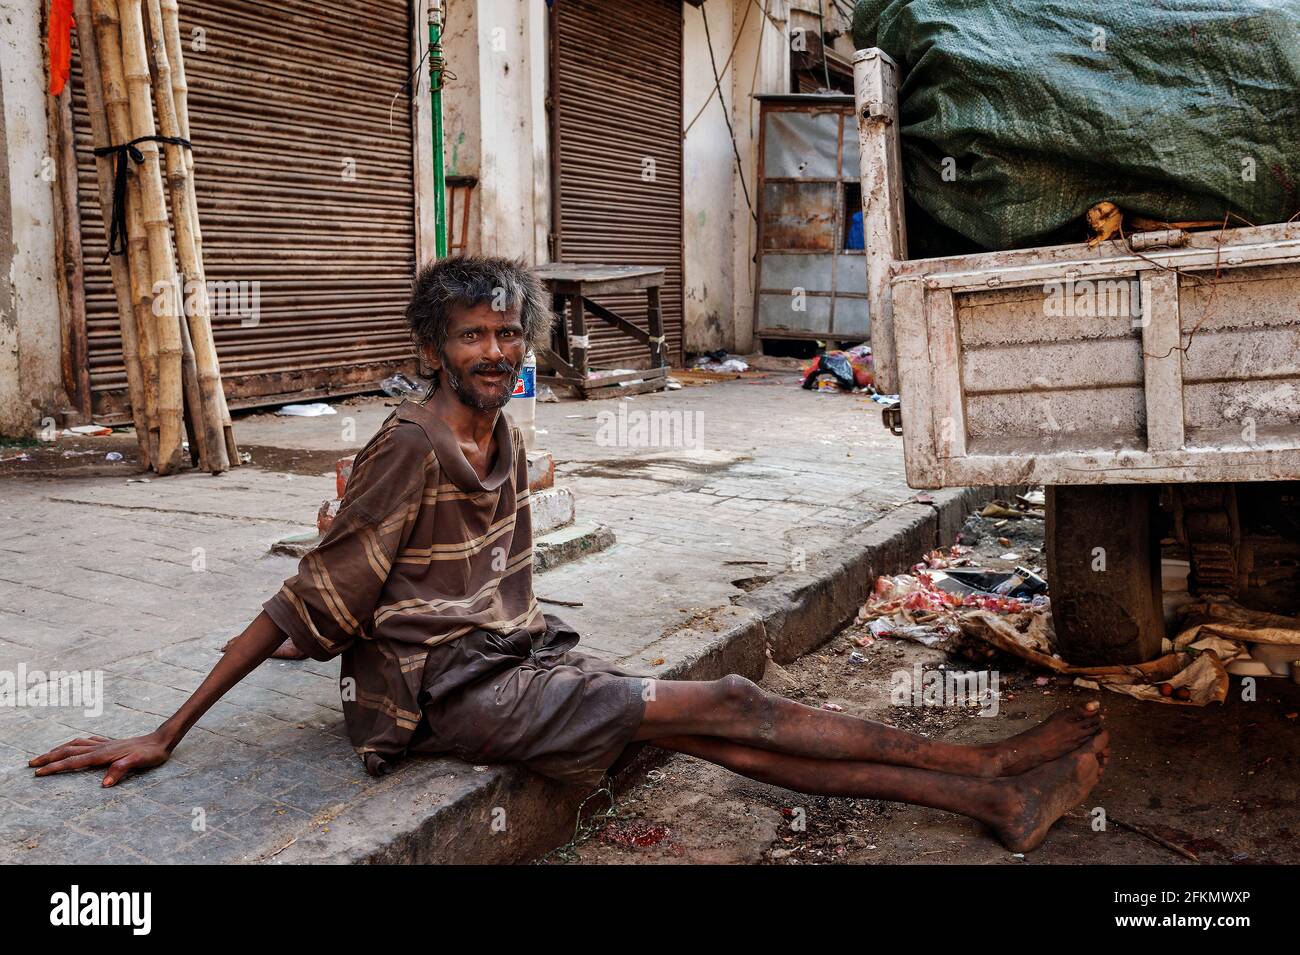 Beggar in the streets of Kolkata, West Bengal, India, Asia Stock Photo